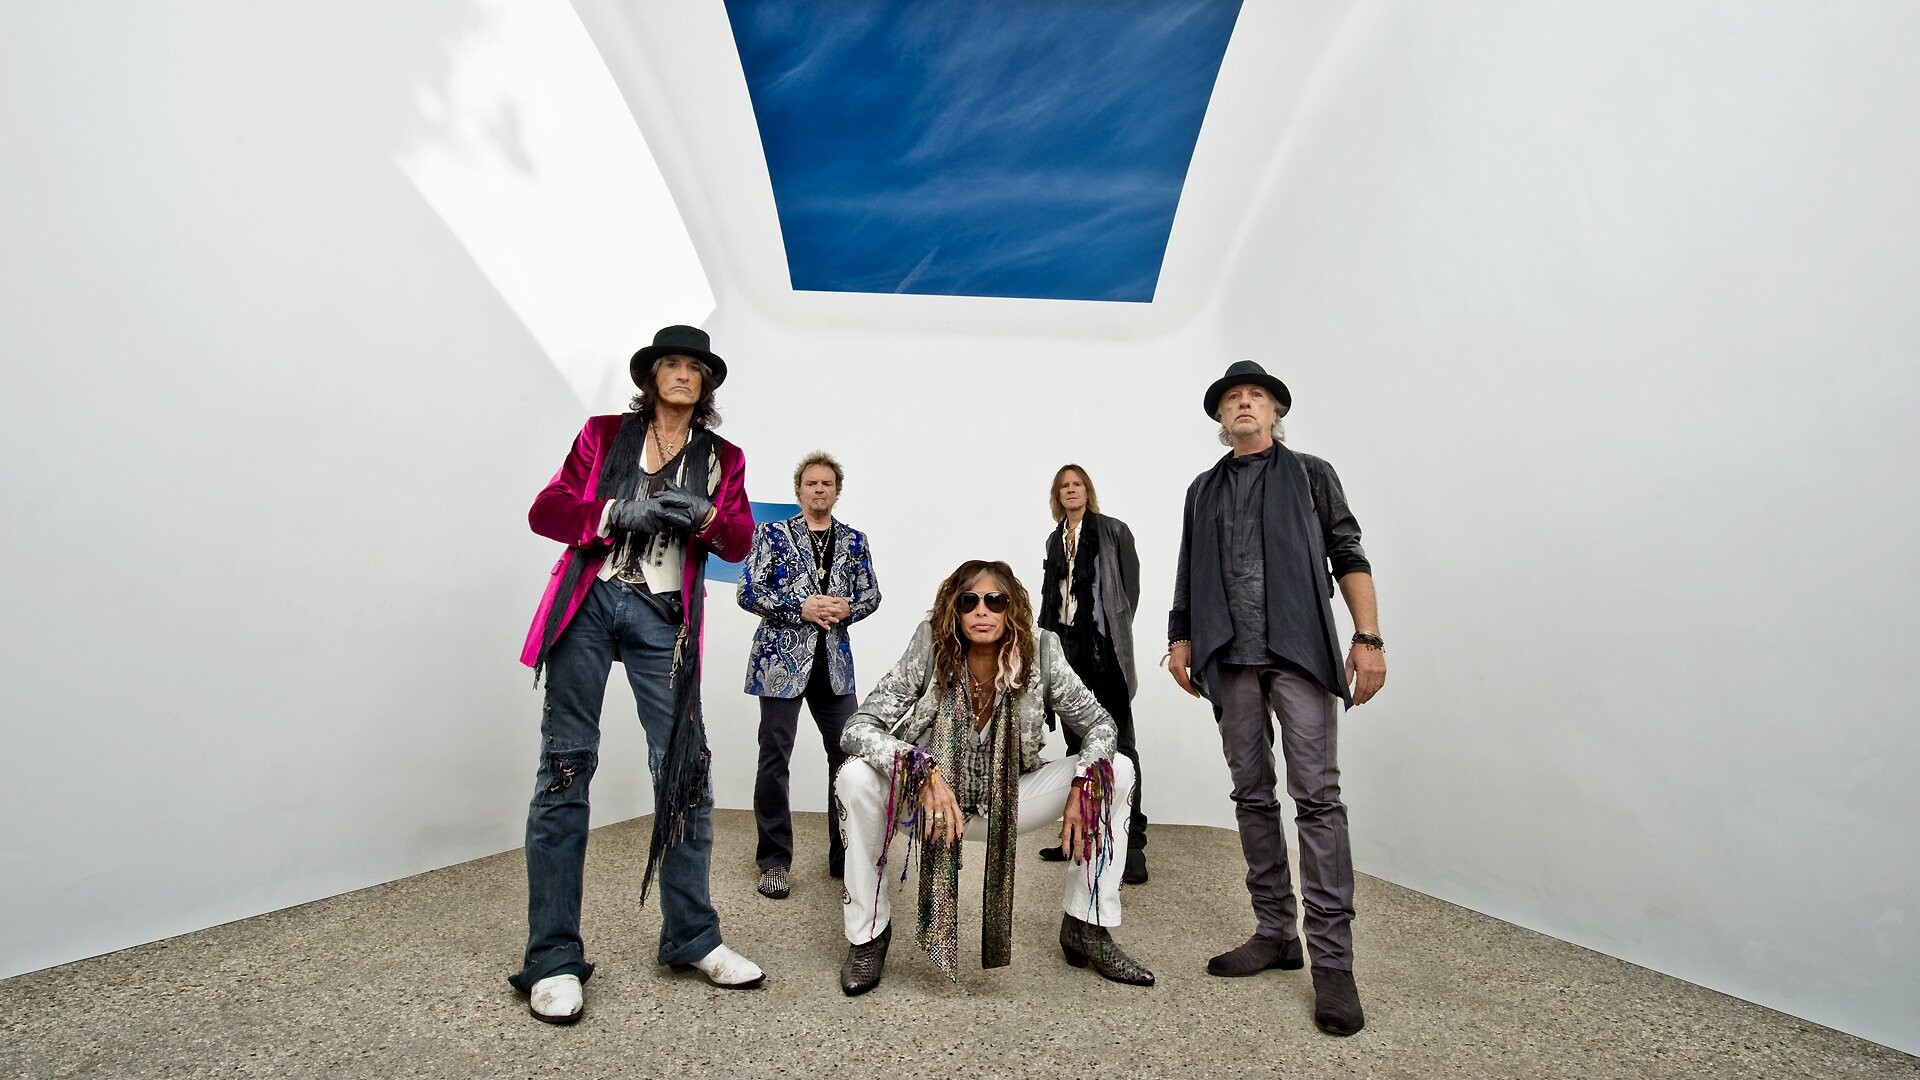 Aerosmith: The best-selling American hard rock band of all time. 1920x1080 Full HD Wallpaper.